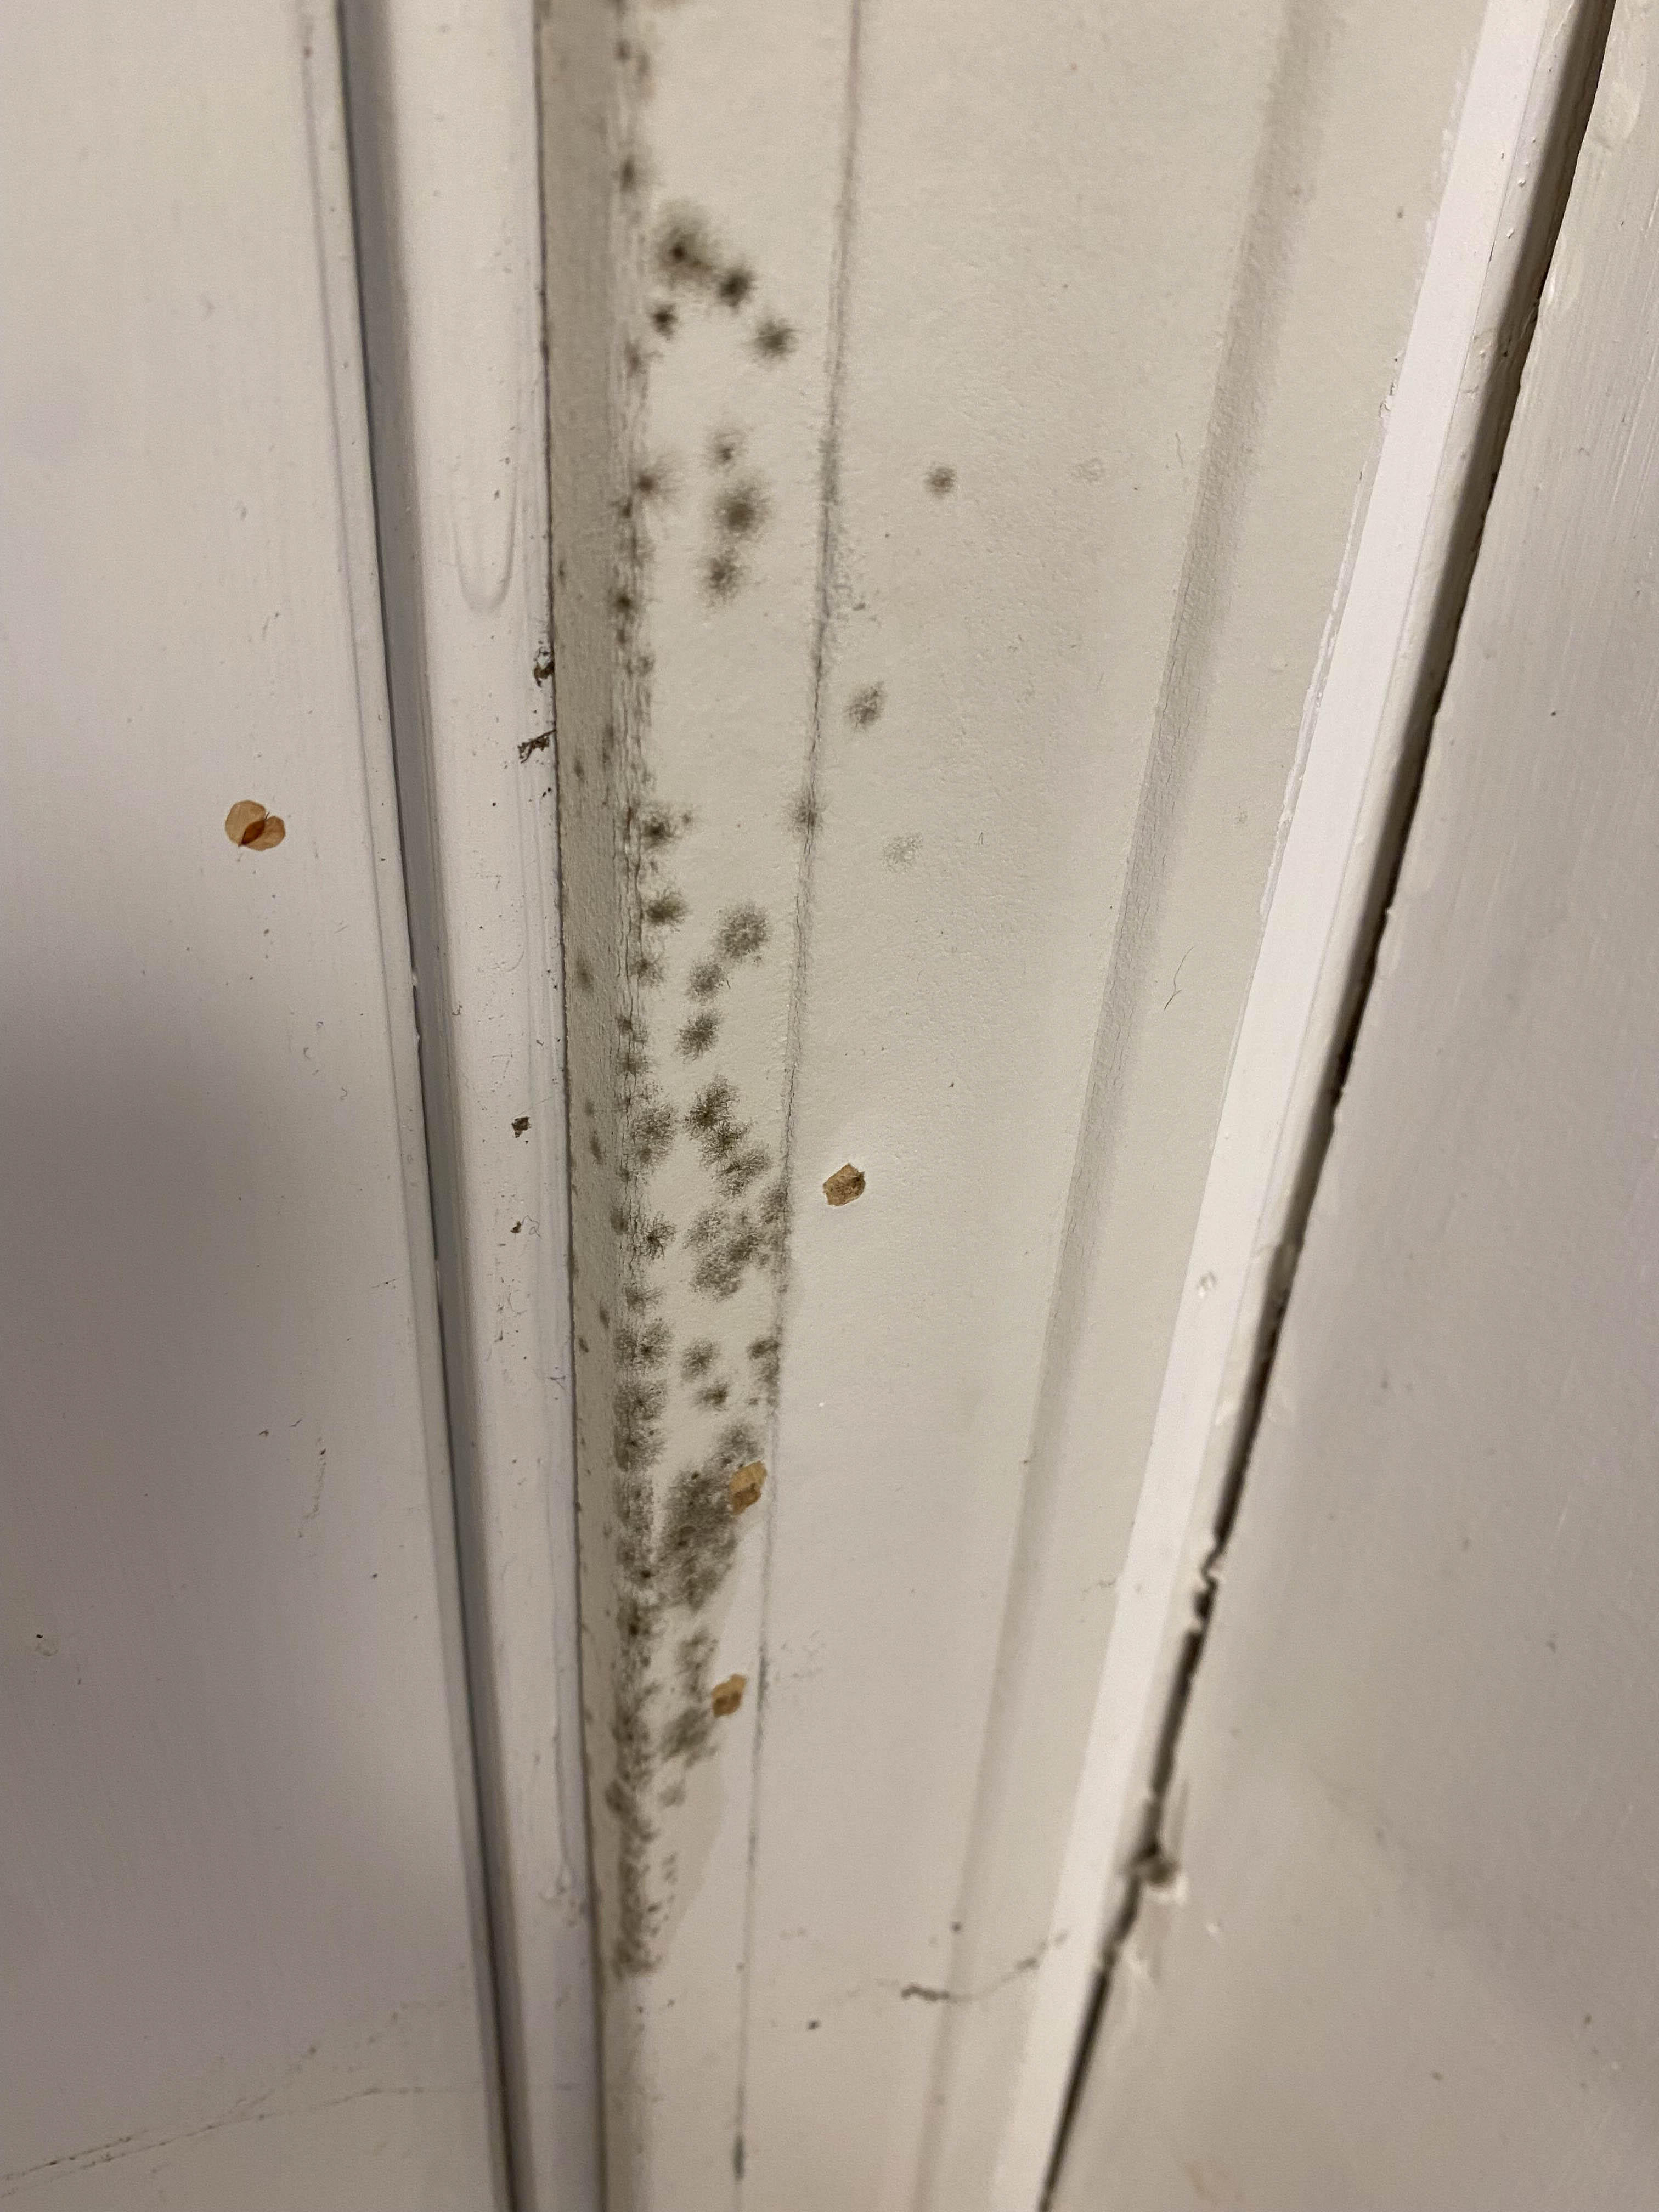 If there are unpleasant odors coming from your walls, floors, or drains, you might have a mold problem. You can depend on SERVPRO of Boston Downtown/Back Bay/South Boston / Dorchester to handle all of your mold removal needs. If you have any questions or would like to schedule service, please give us a call!